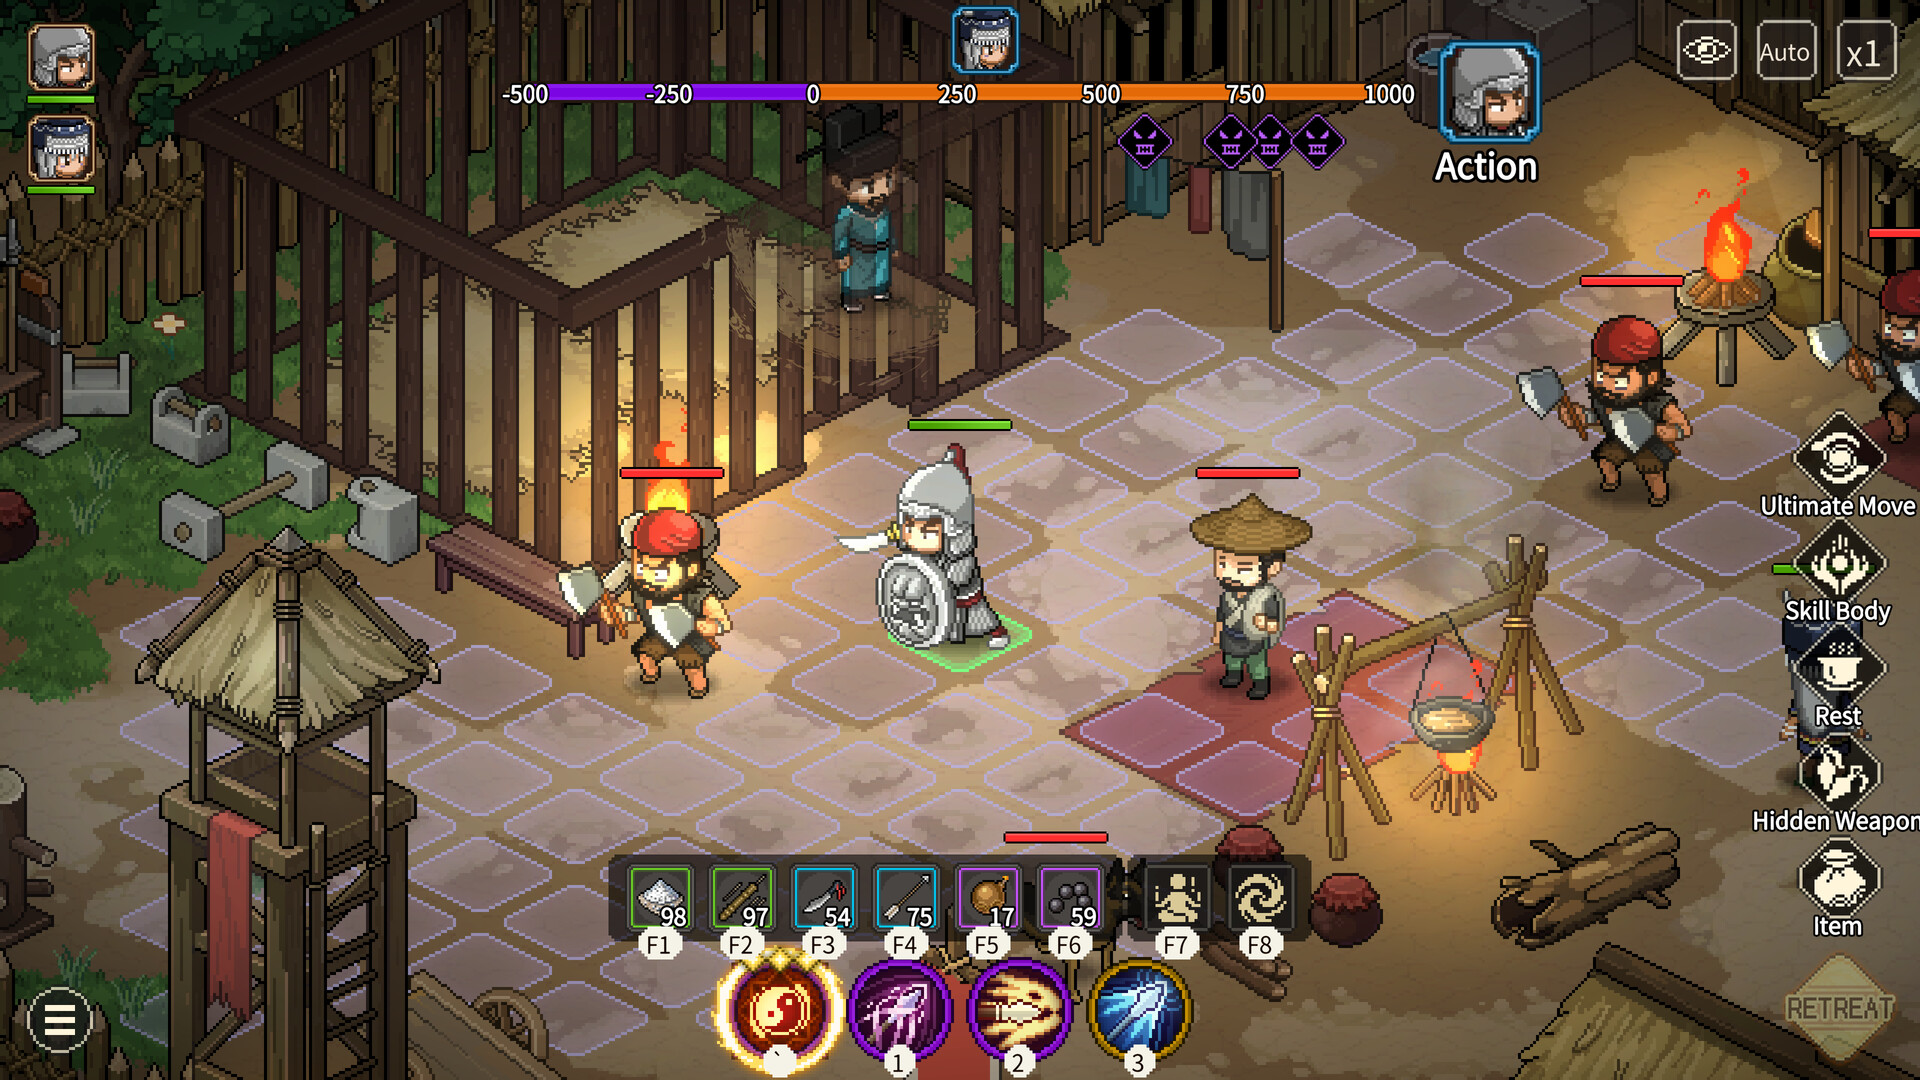 Mobile turn-based RPG Adventure Time Heroes coming from Singapore